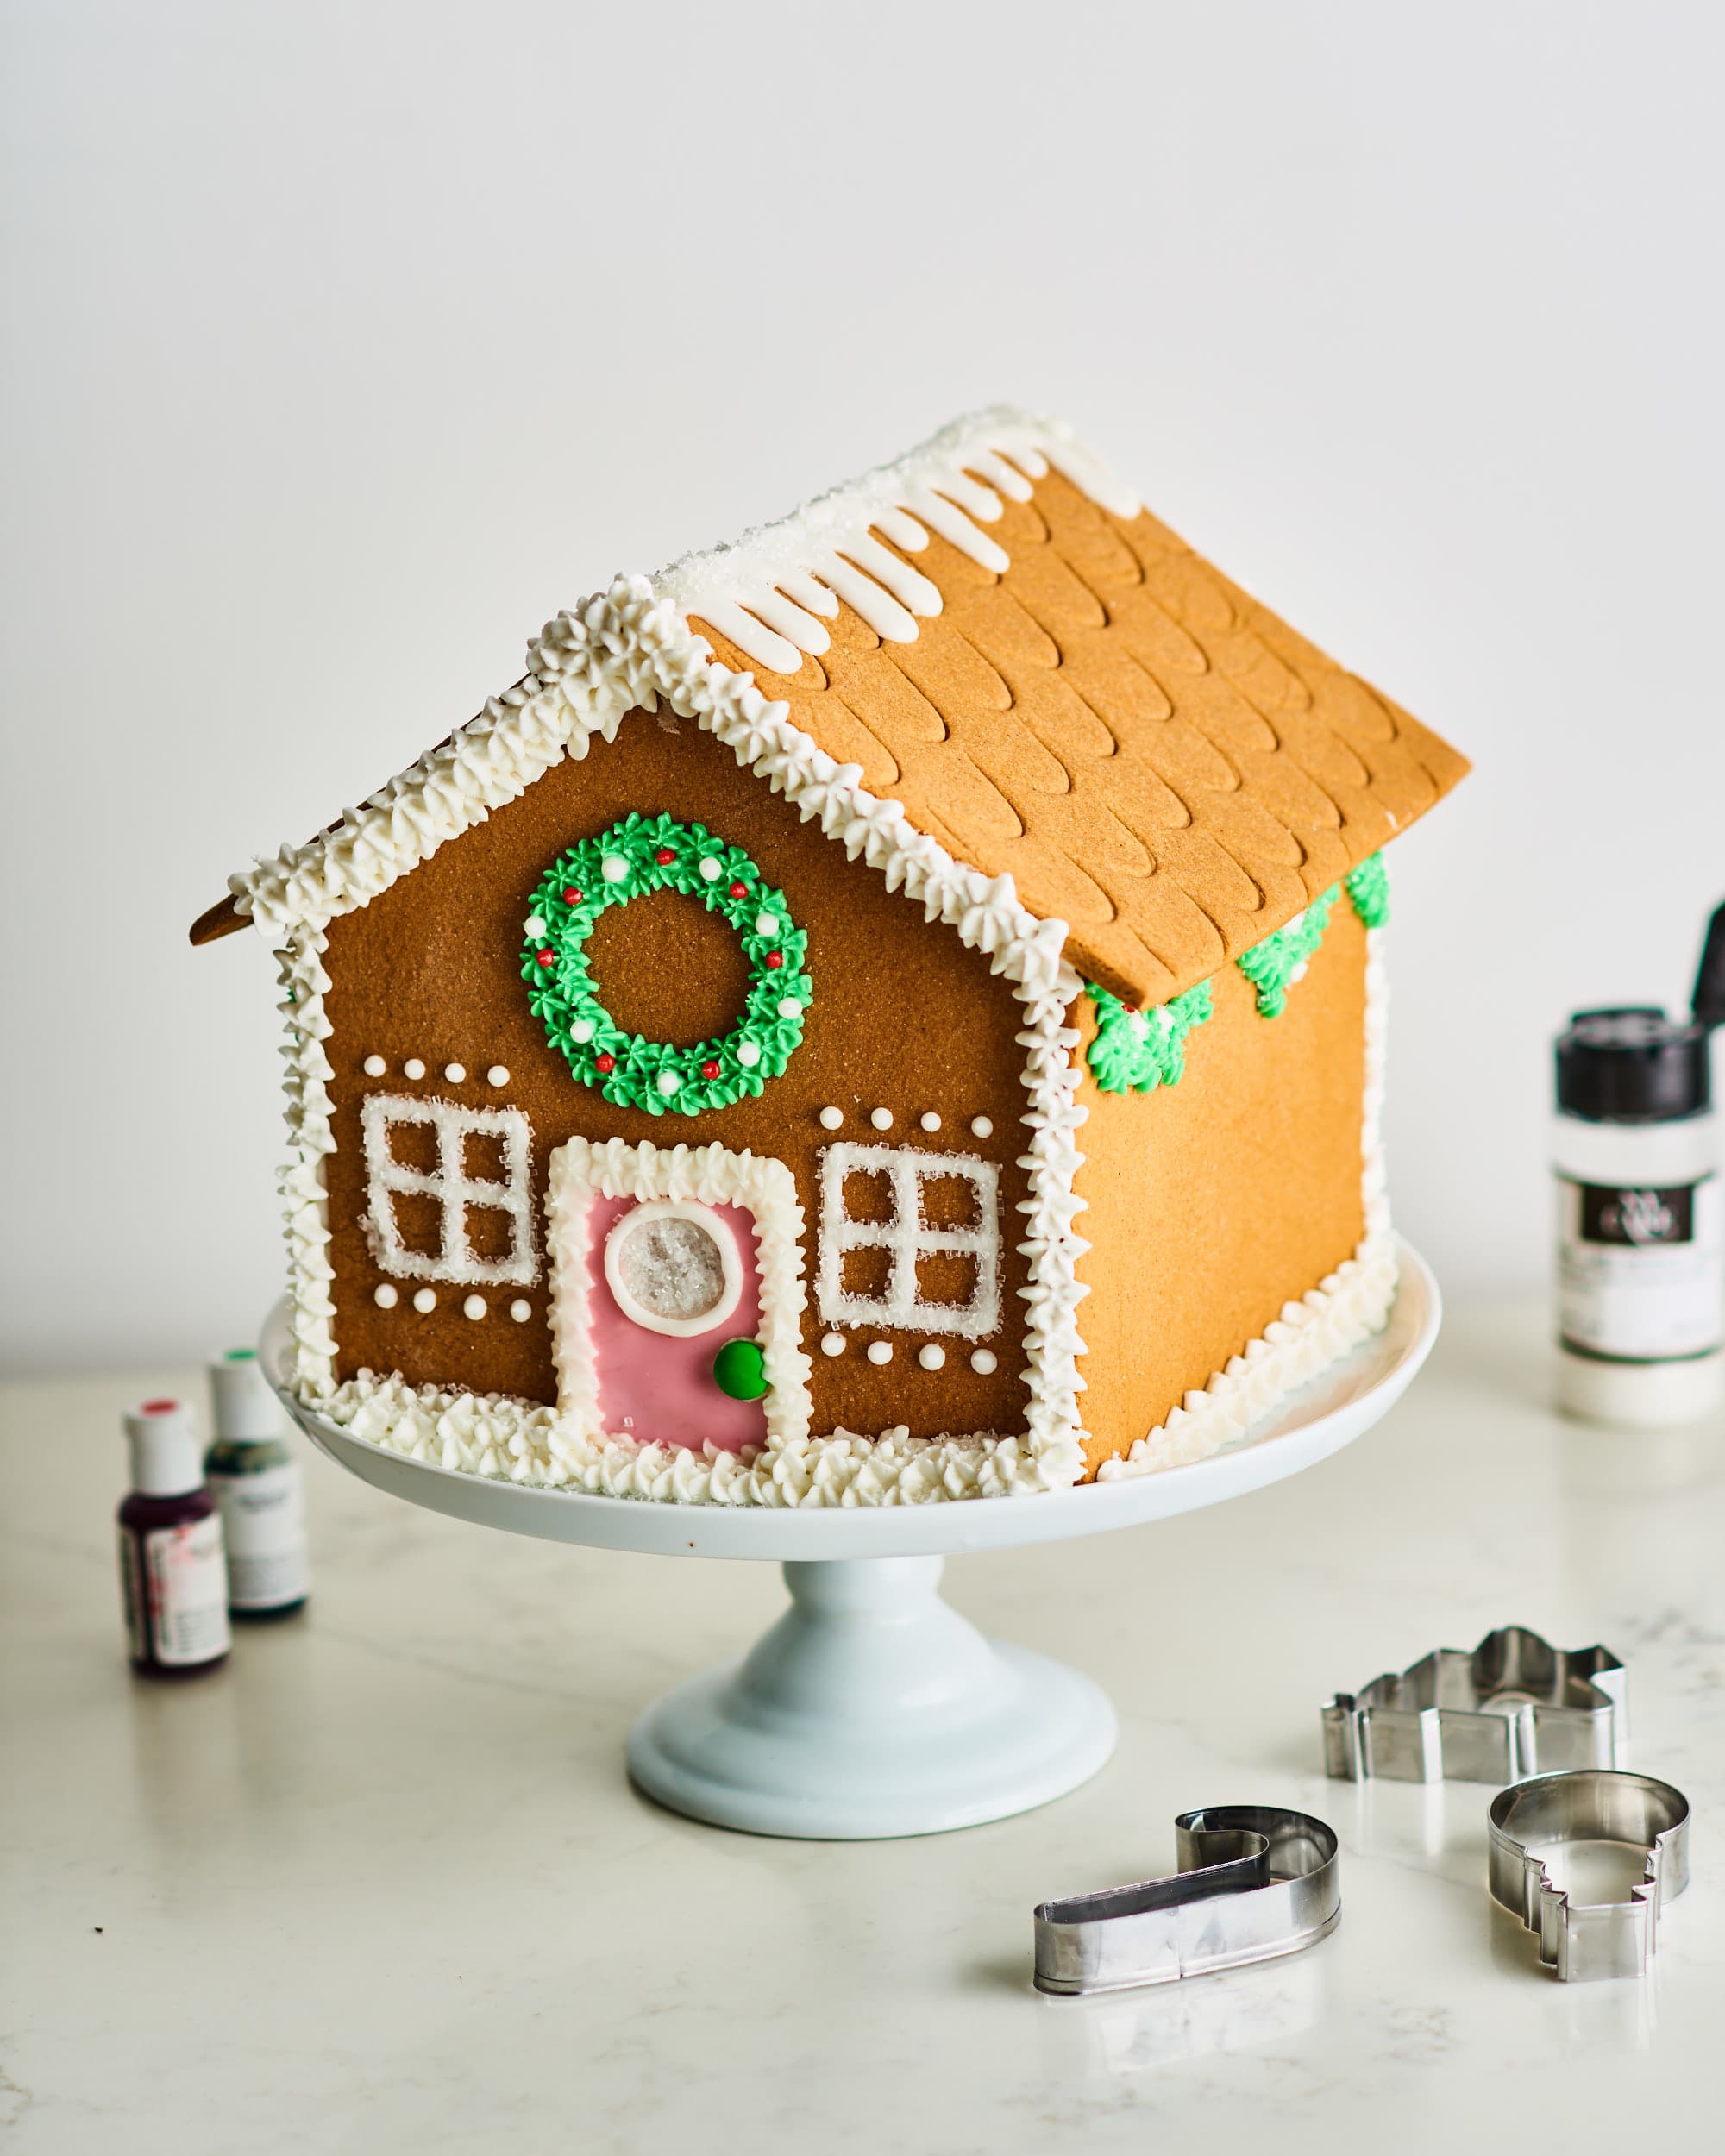 https://cdn.apartmenttherapy.info/image/upload/v1575320961/k/Photo/Recipes/2019-12-HT-Easiest-Gingerbread-House/HT-Easiest-Gingerbread-House_076.jpg